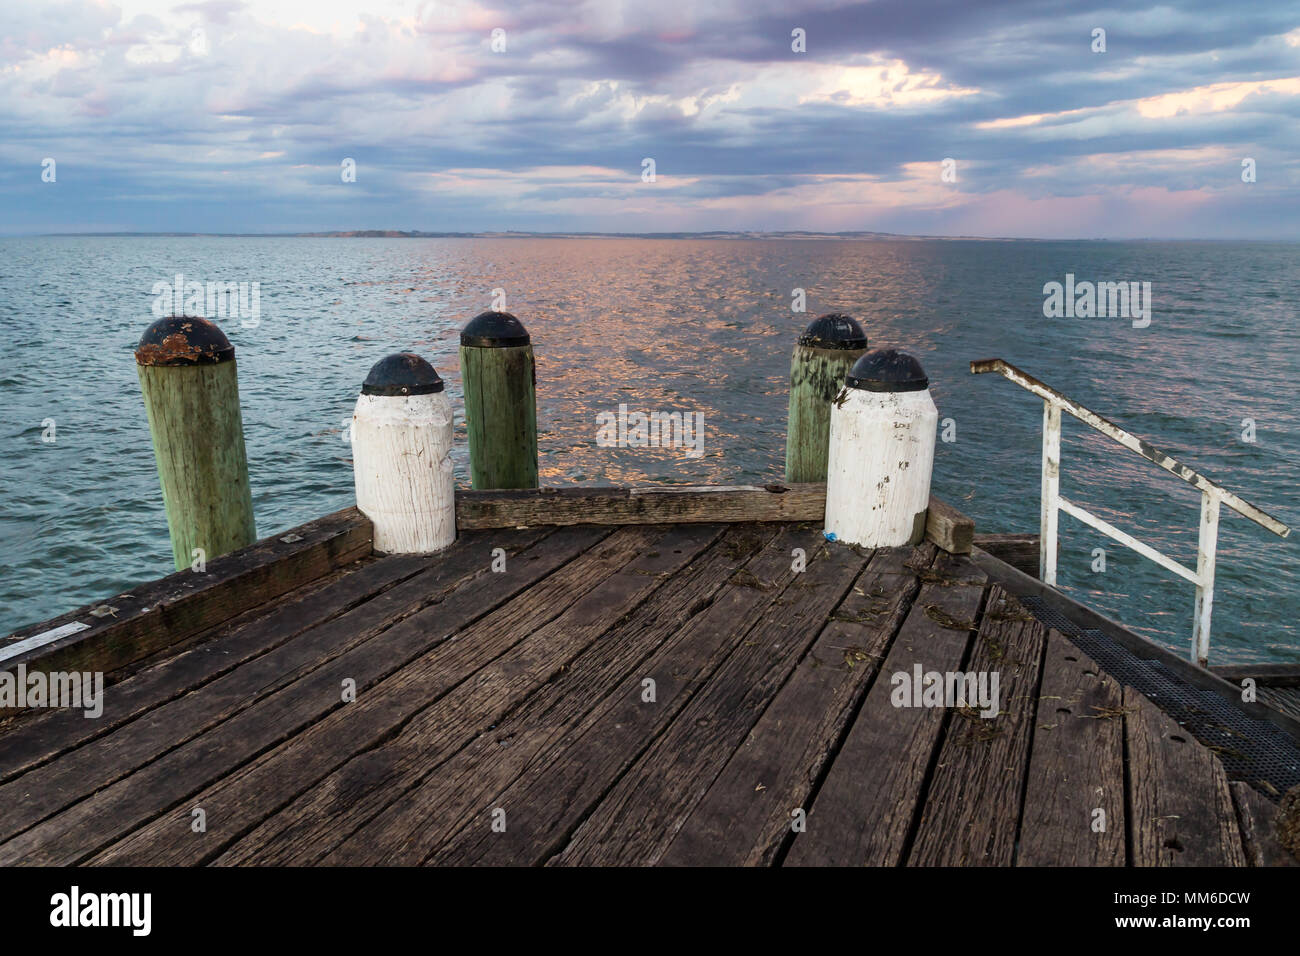 Sunset at the jetty with green and white pillars of Cowes, Phillip Island, Australia Stock Photo